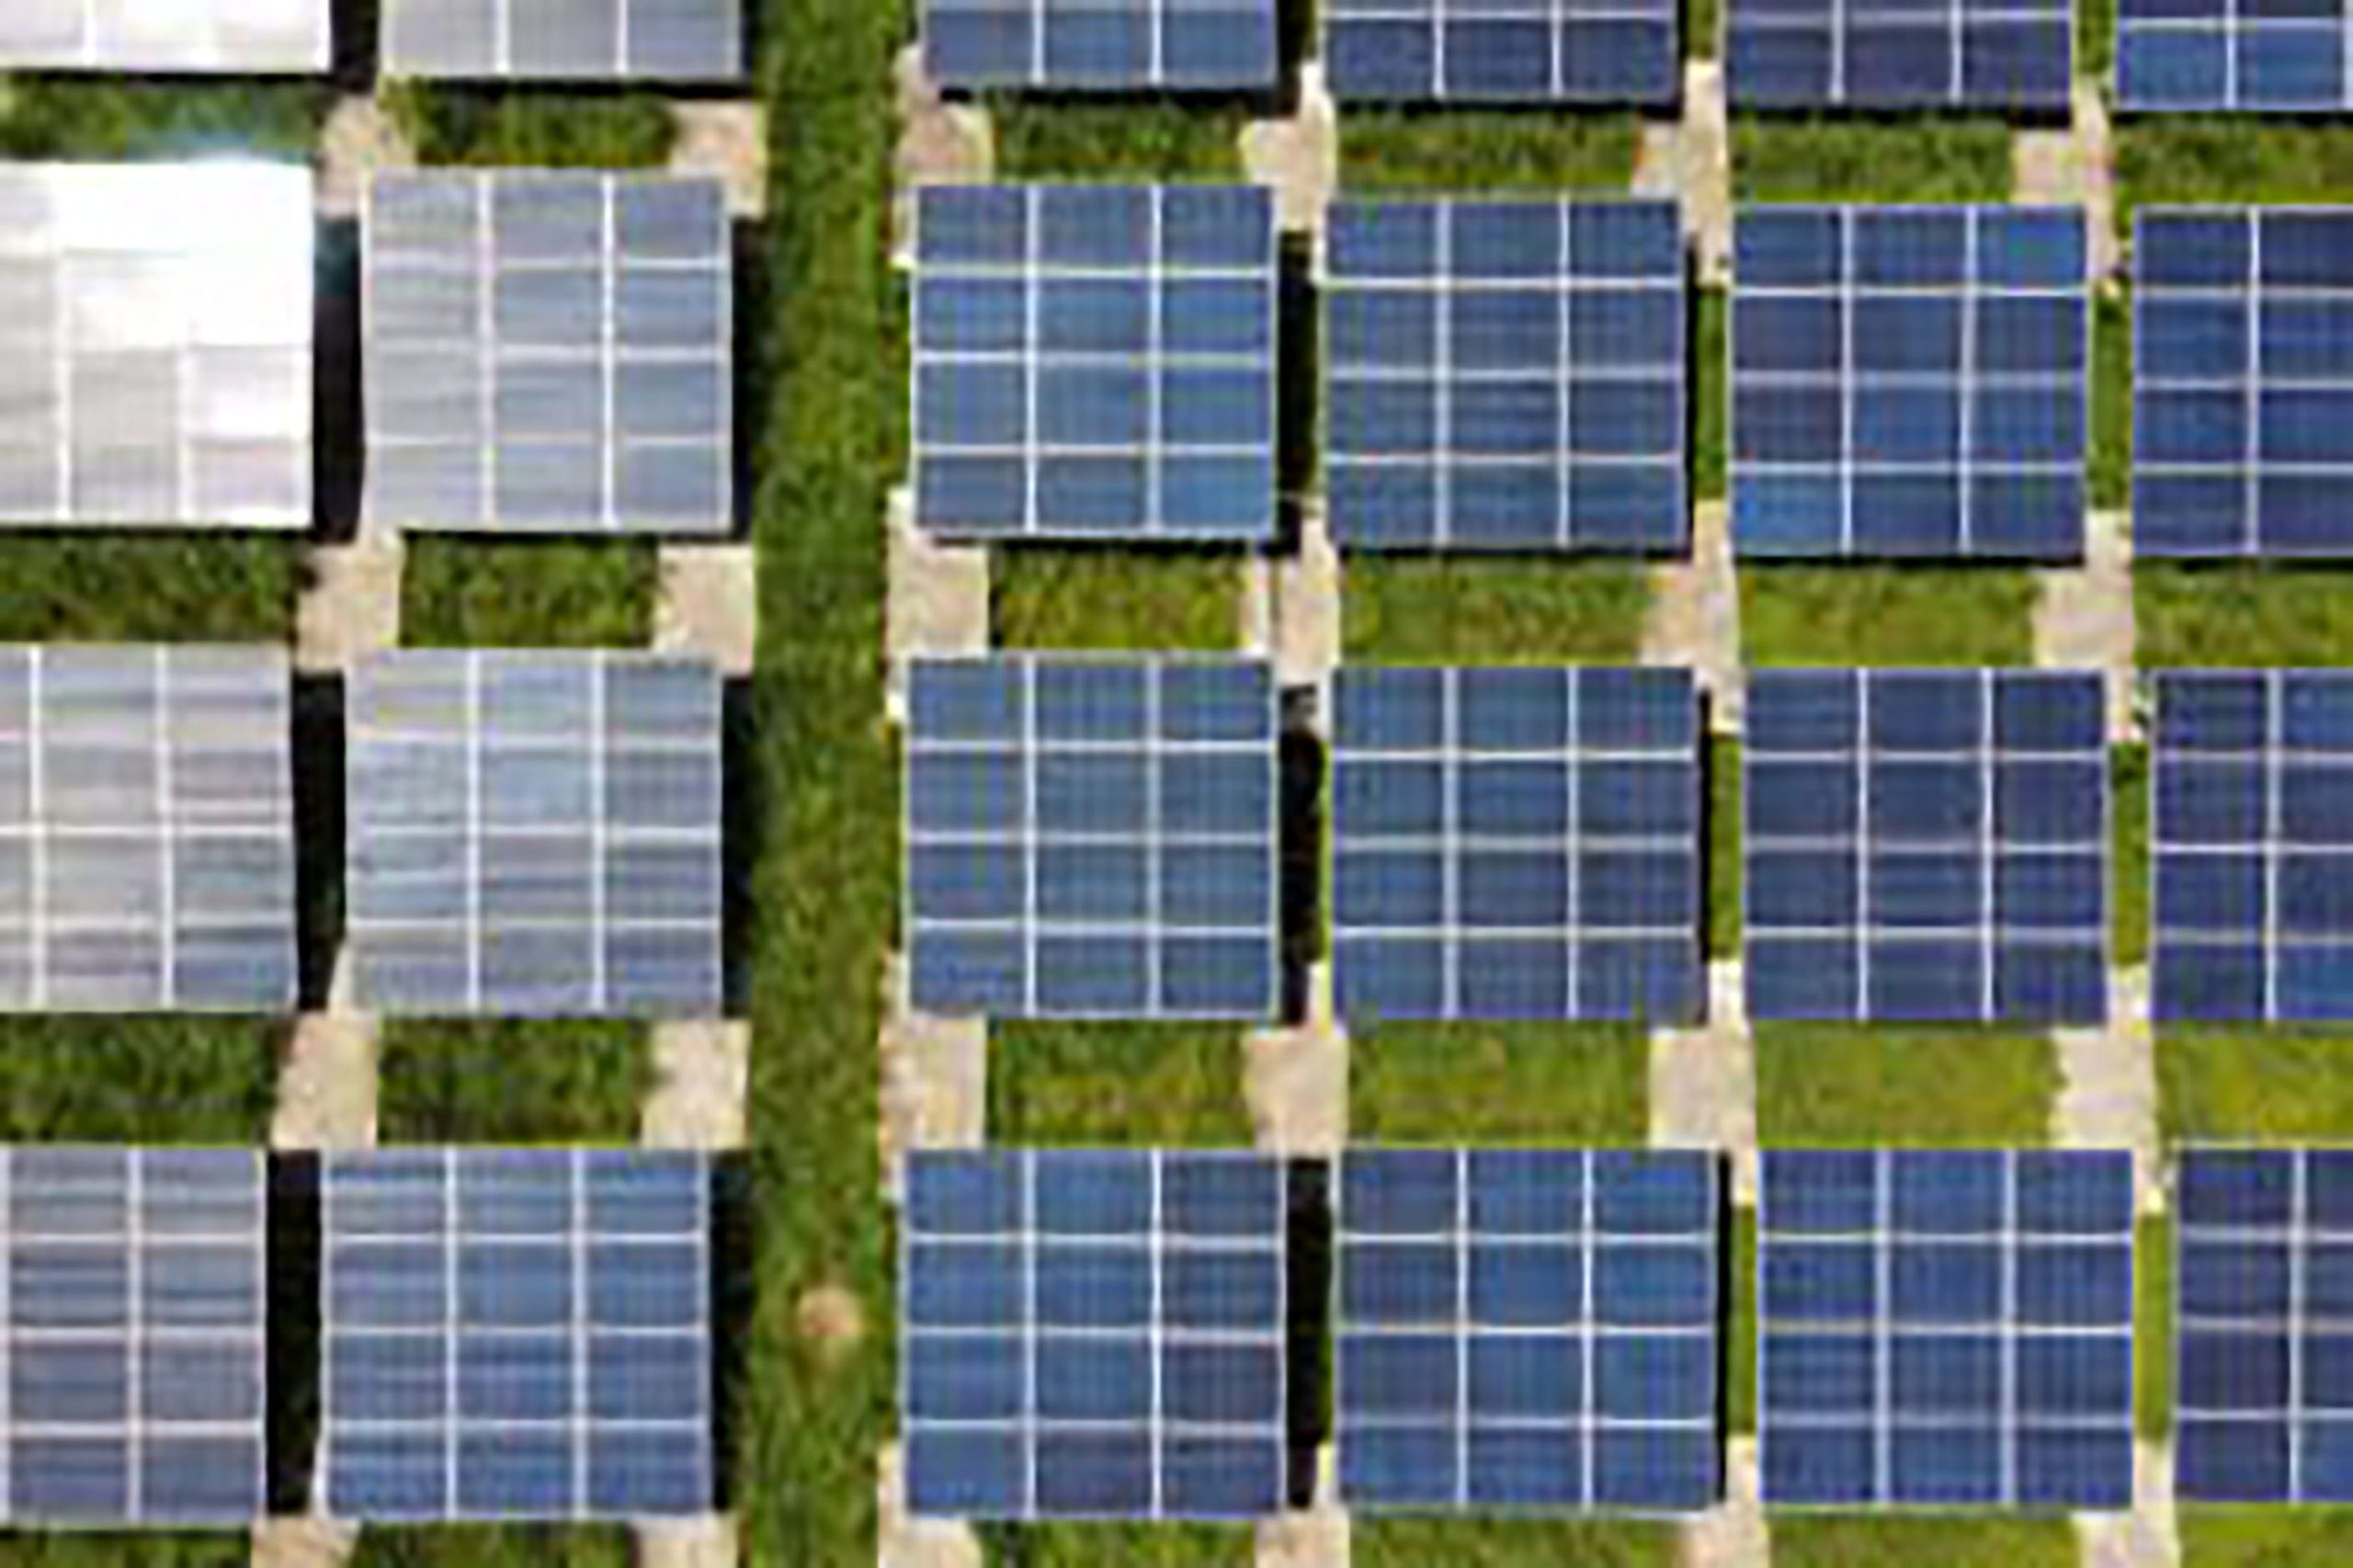 A photo from above of 24 square solar panels.